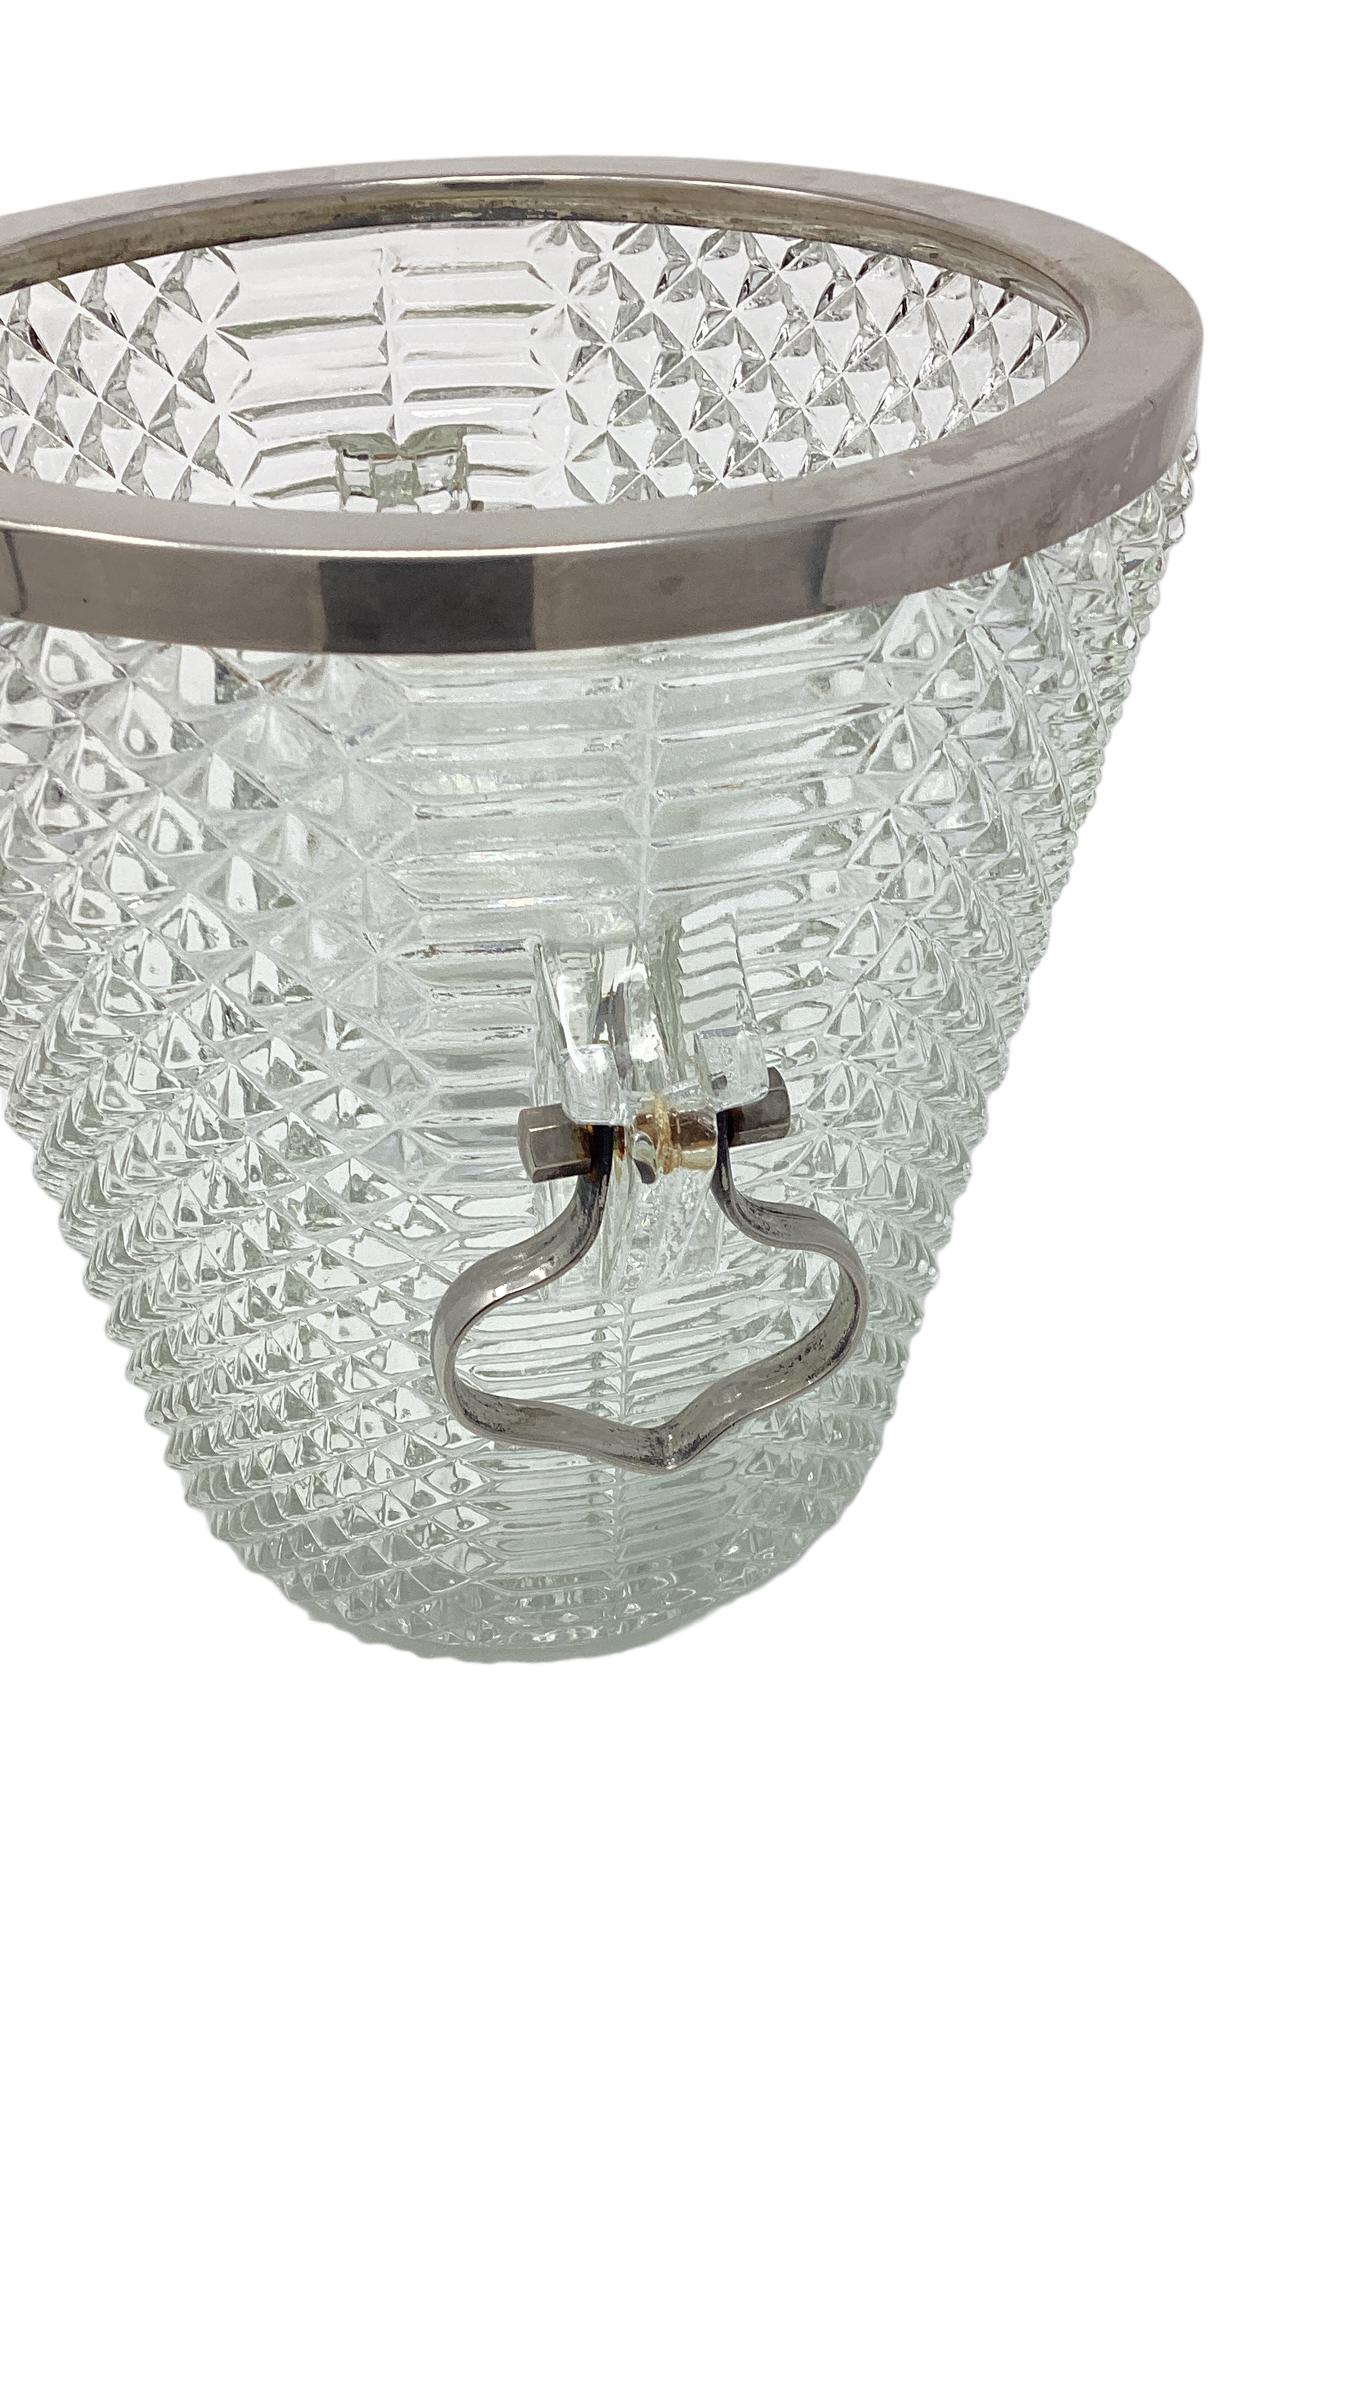 Vintage English Silver Plated and Glass Wine Cooler Ice Bucket  In Good Condition For Sale In Chapel Hill, NC